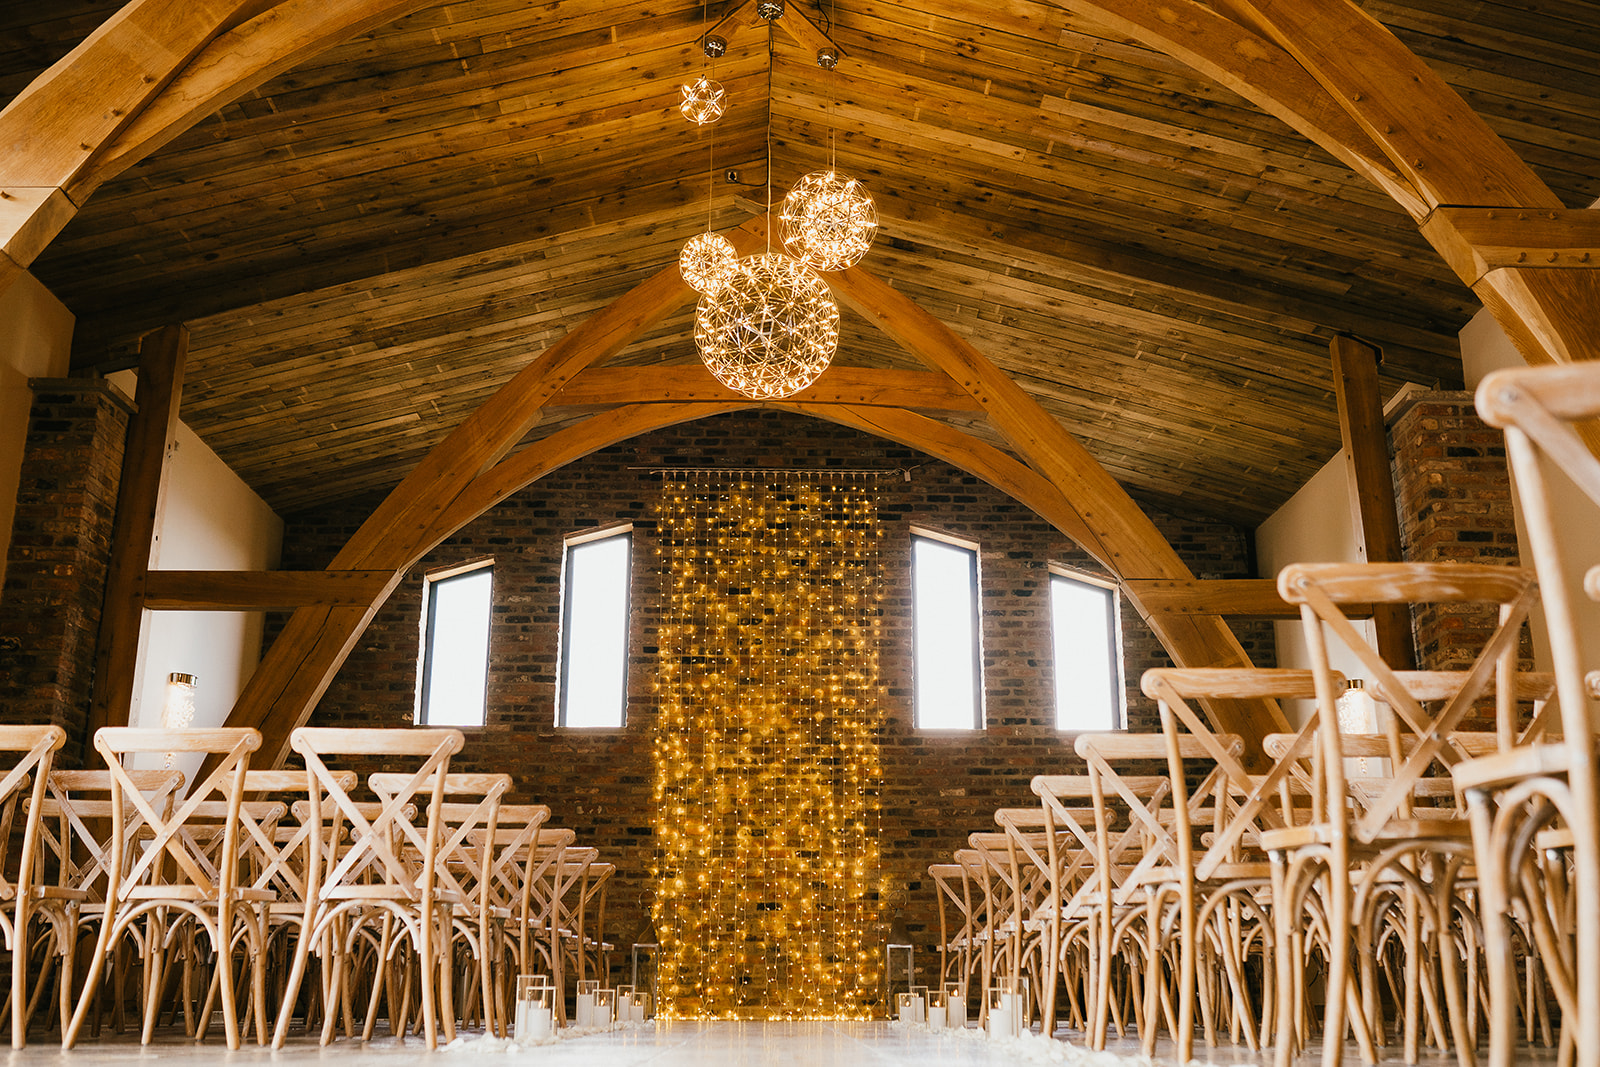 
The ceremony room at Oakwood at Ryther is a picture-perfect setting for exchanging vows and beginning your journey as a